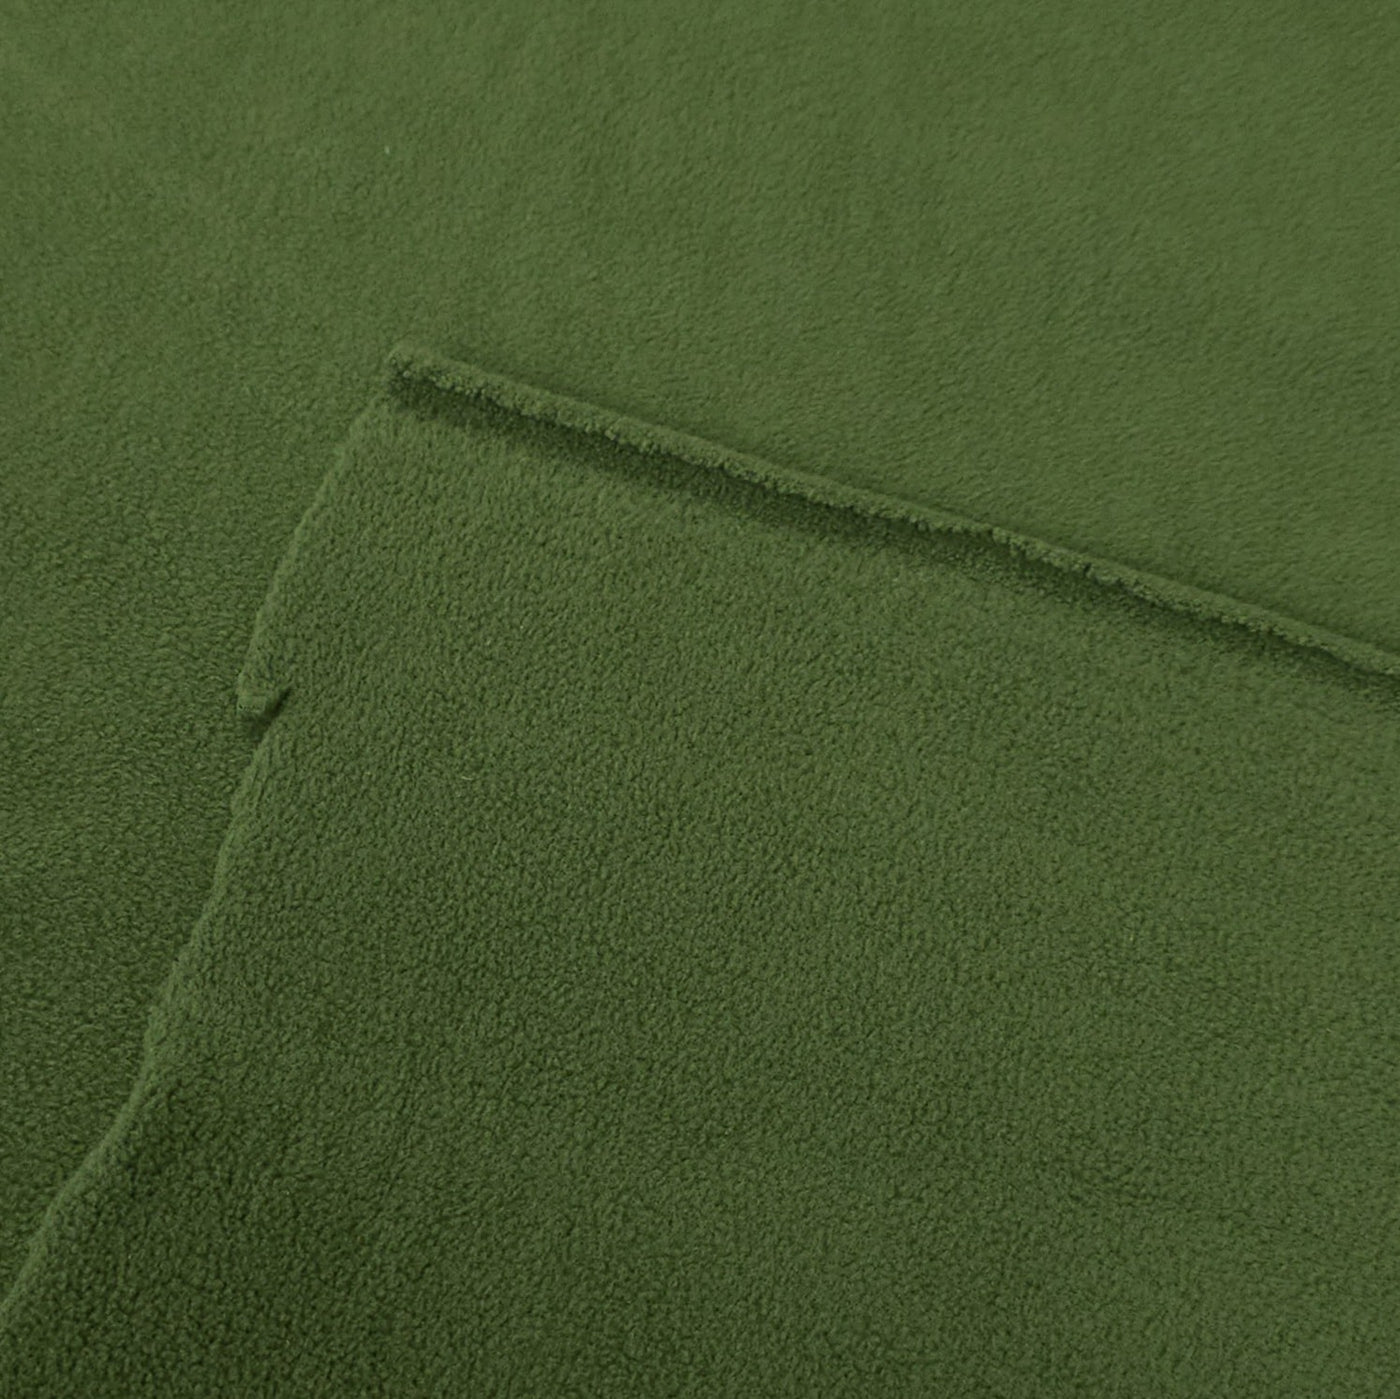 100% recycled polyester fabric